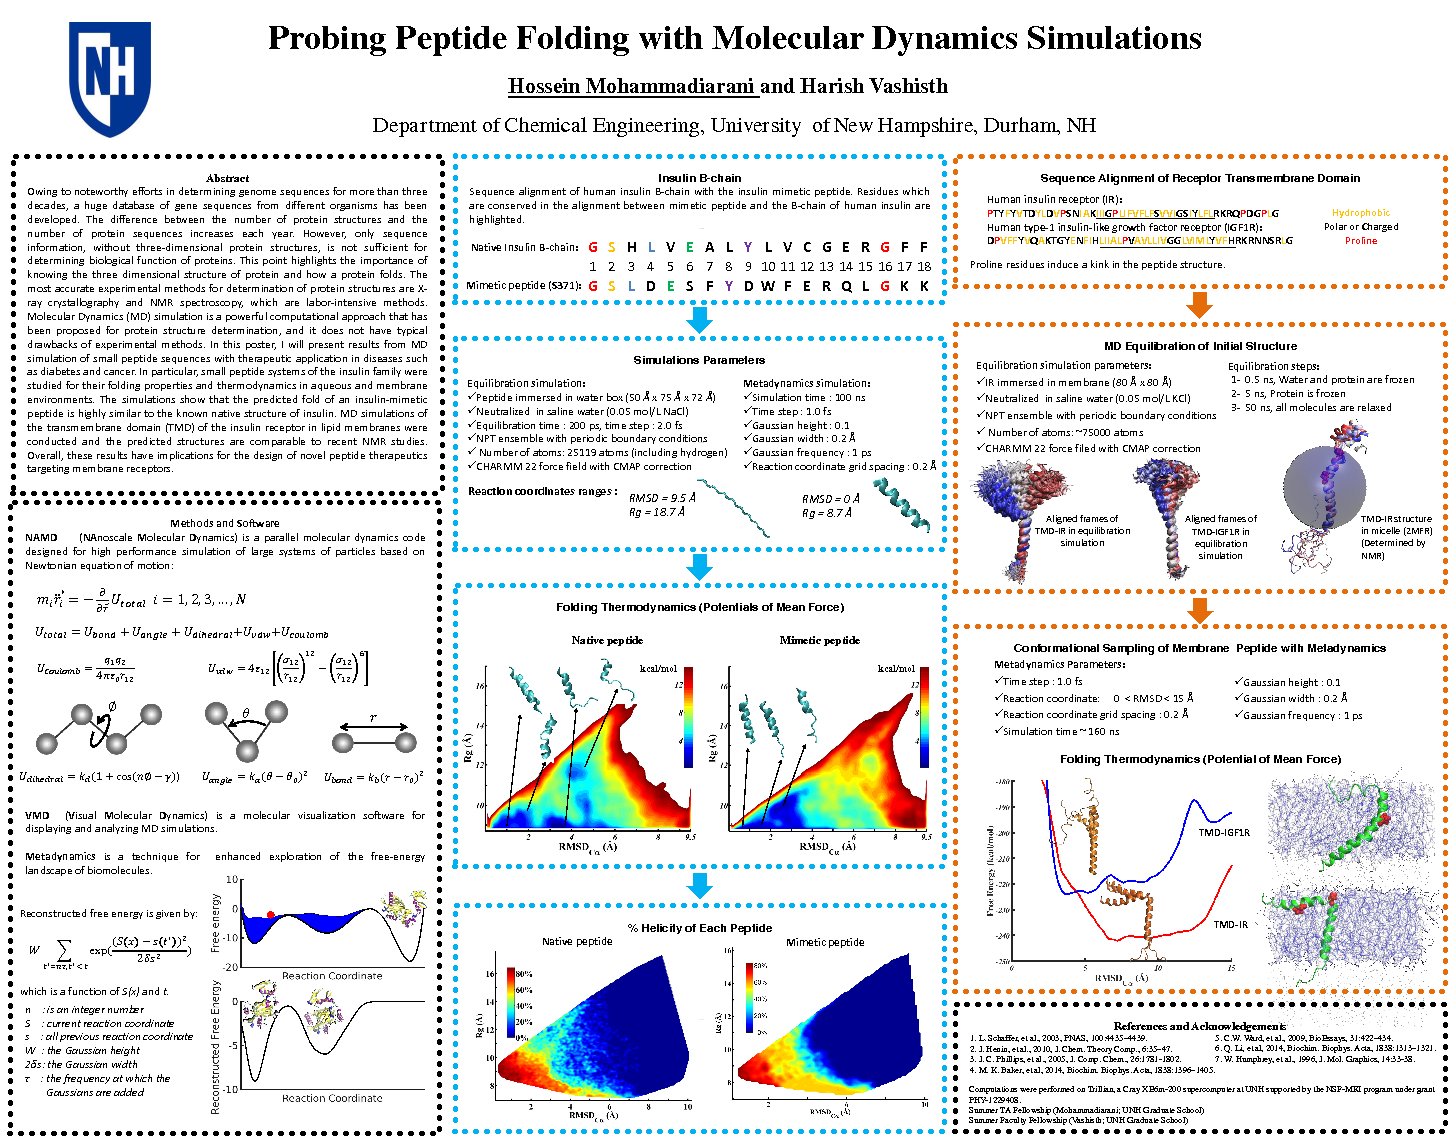 Probing Peptide Folding With Molecular Dynamics Simulations by hm2006